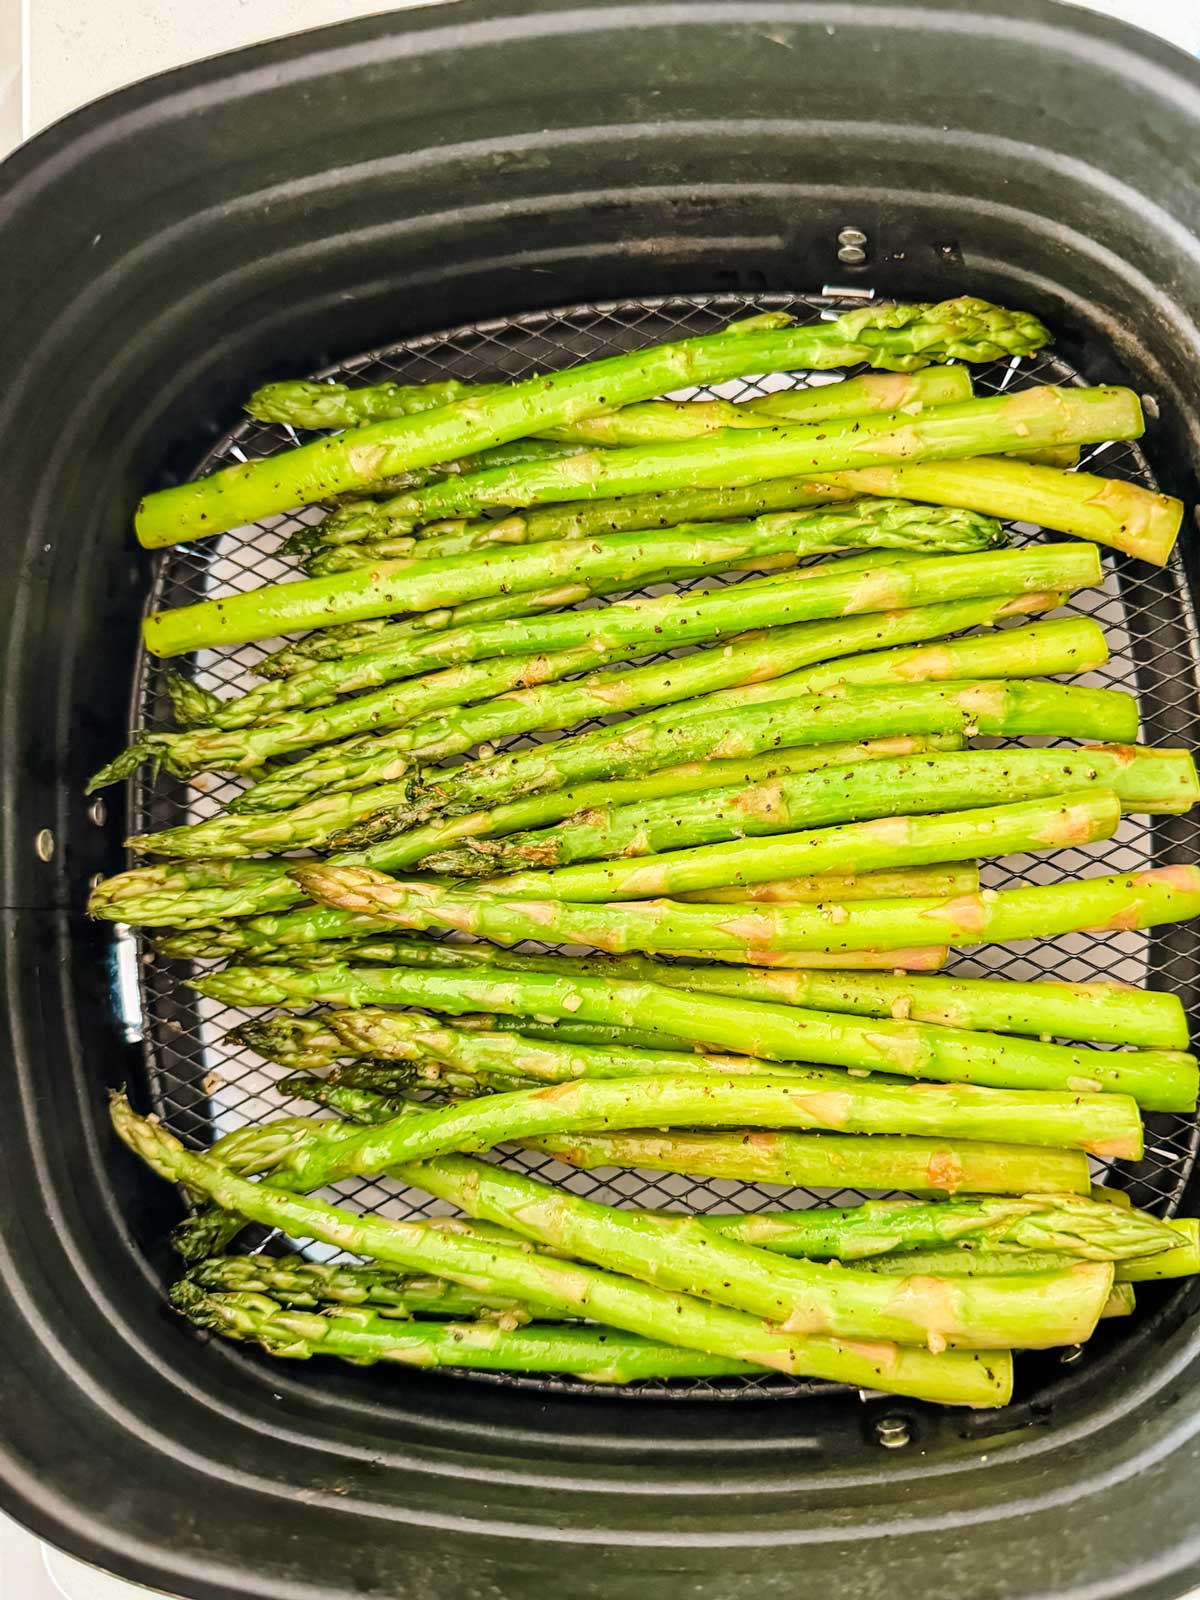 Cooked asparagus in an air fryer basket.